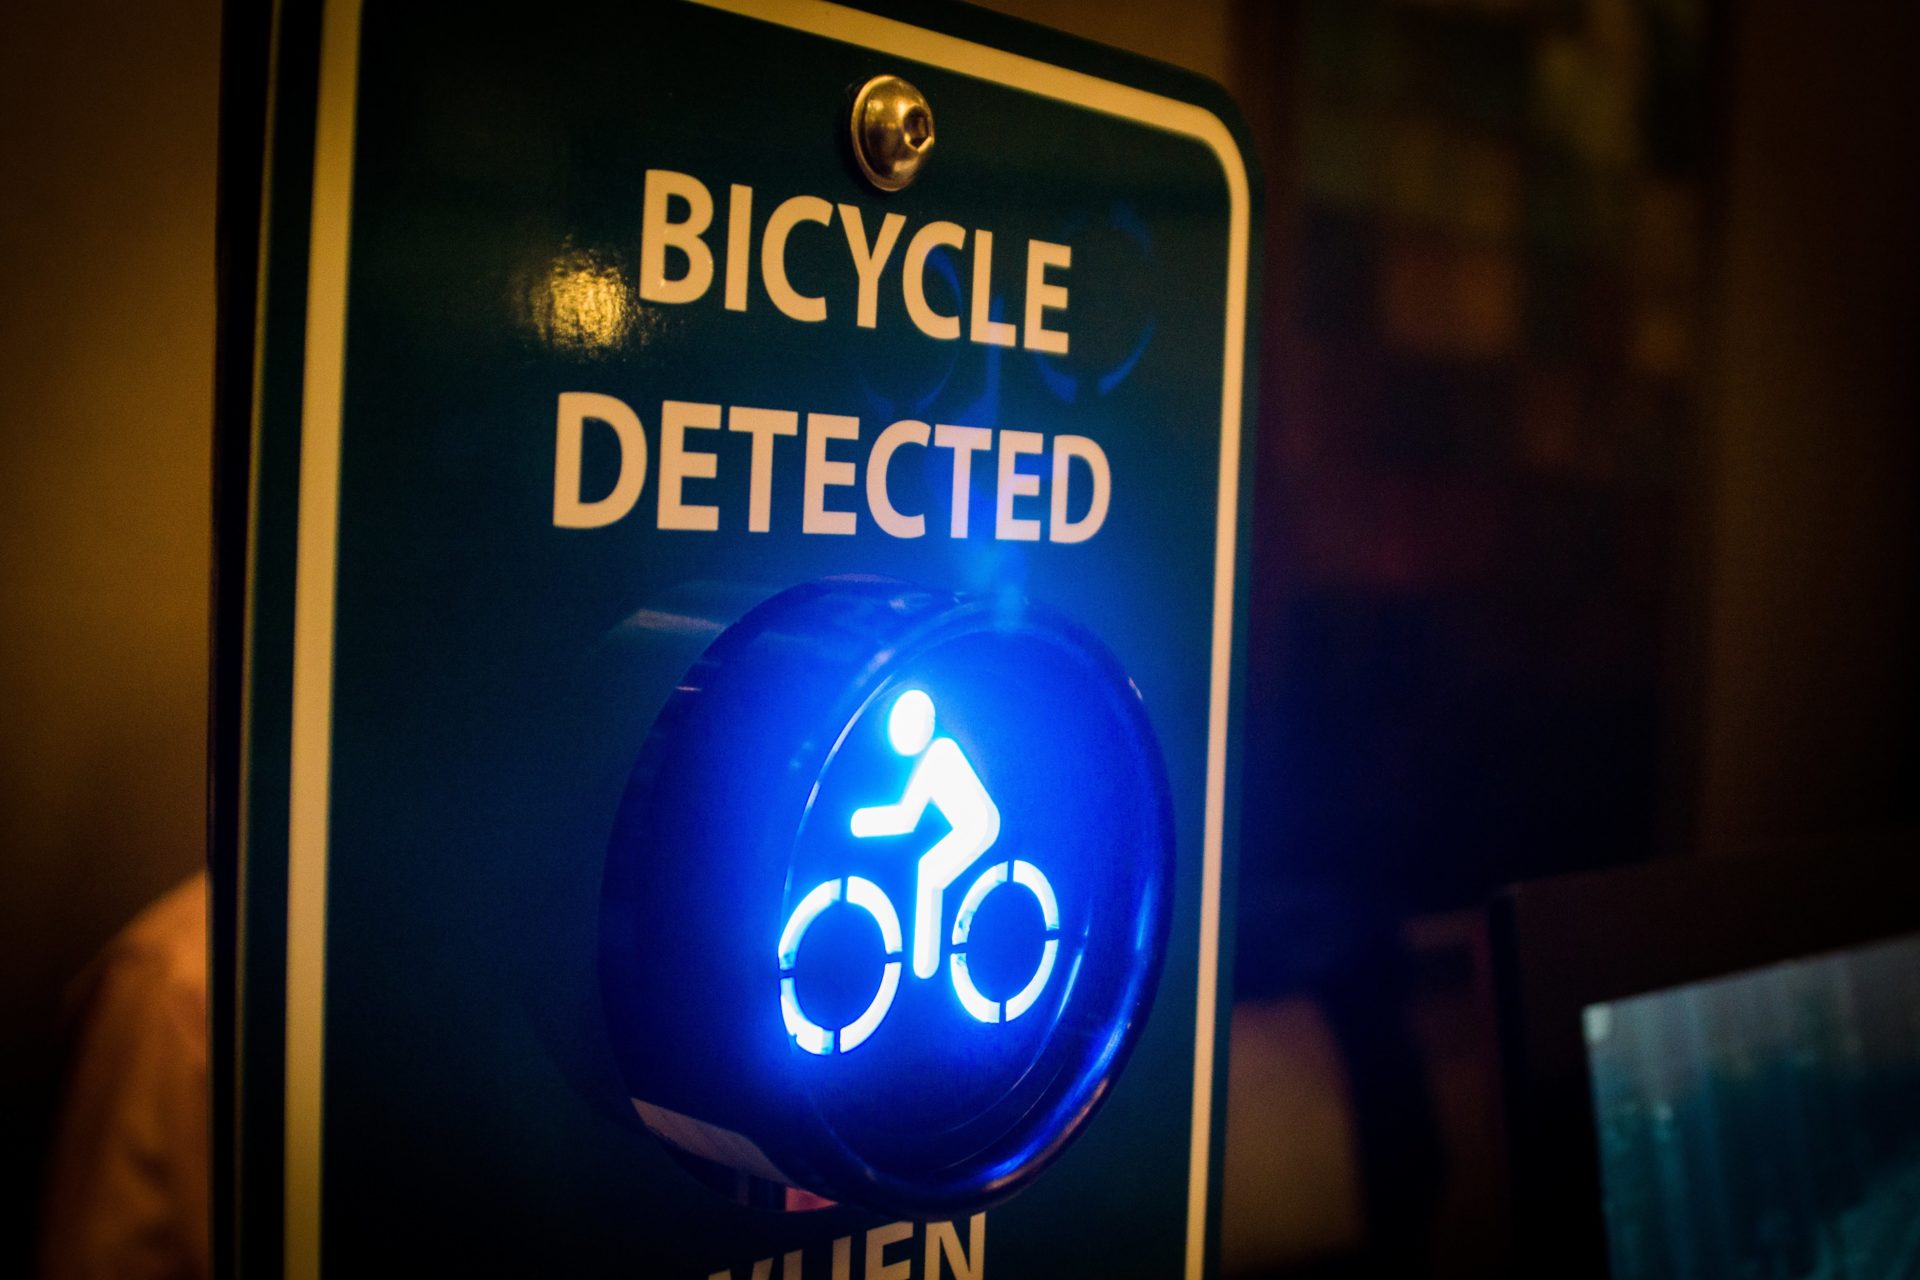 A bicycle detecting sign that lights up.